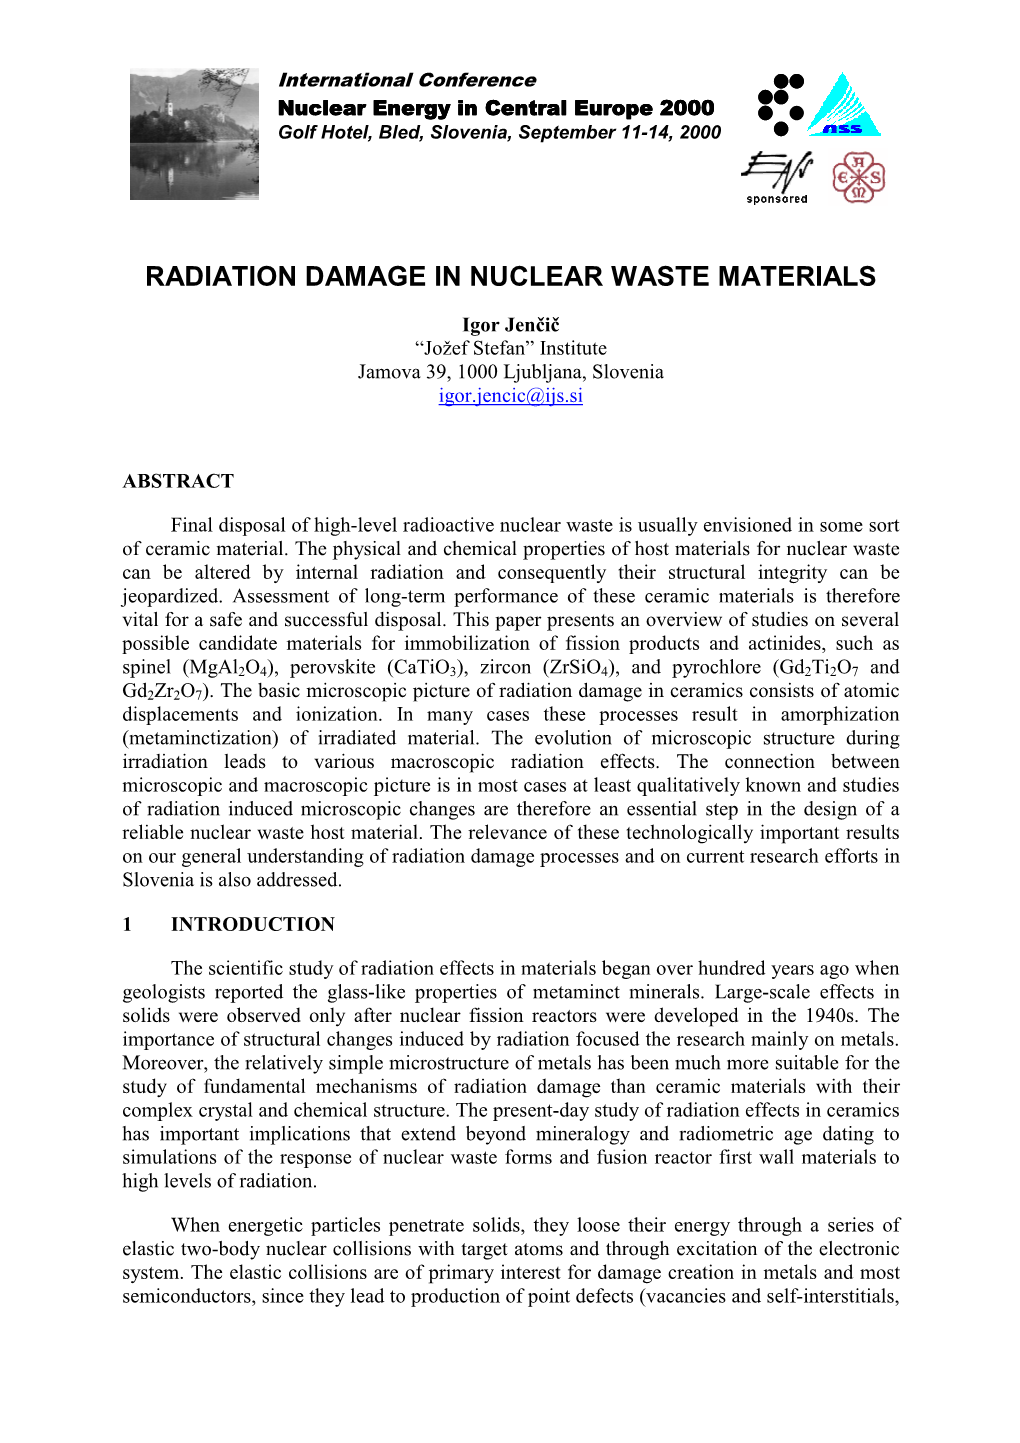 Radiation Damage in Nuclear Waste Materials